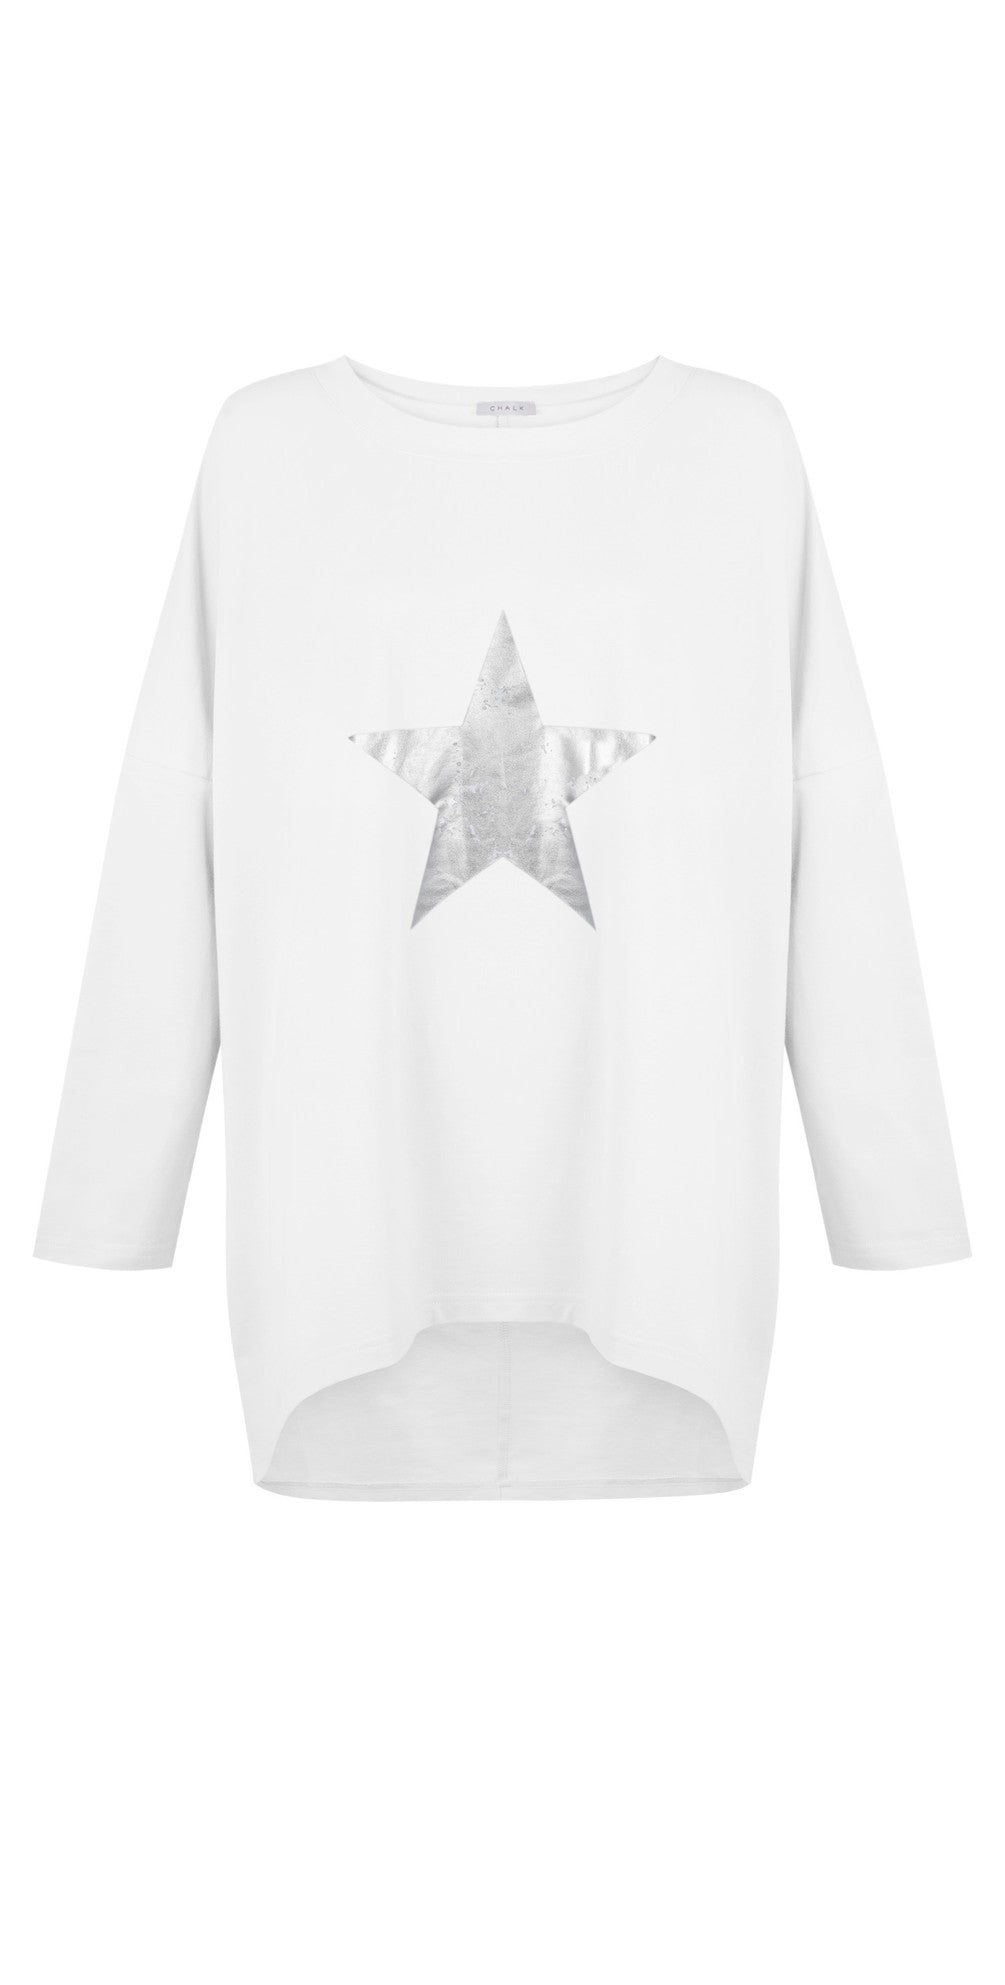 Chalk Clothing Olivia Star Top - White/Silver